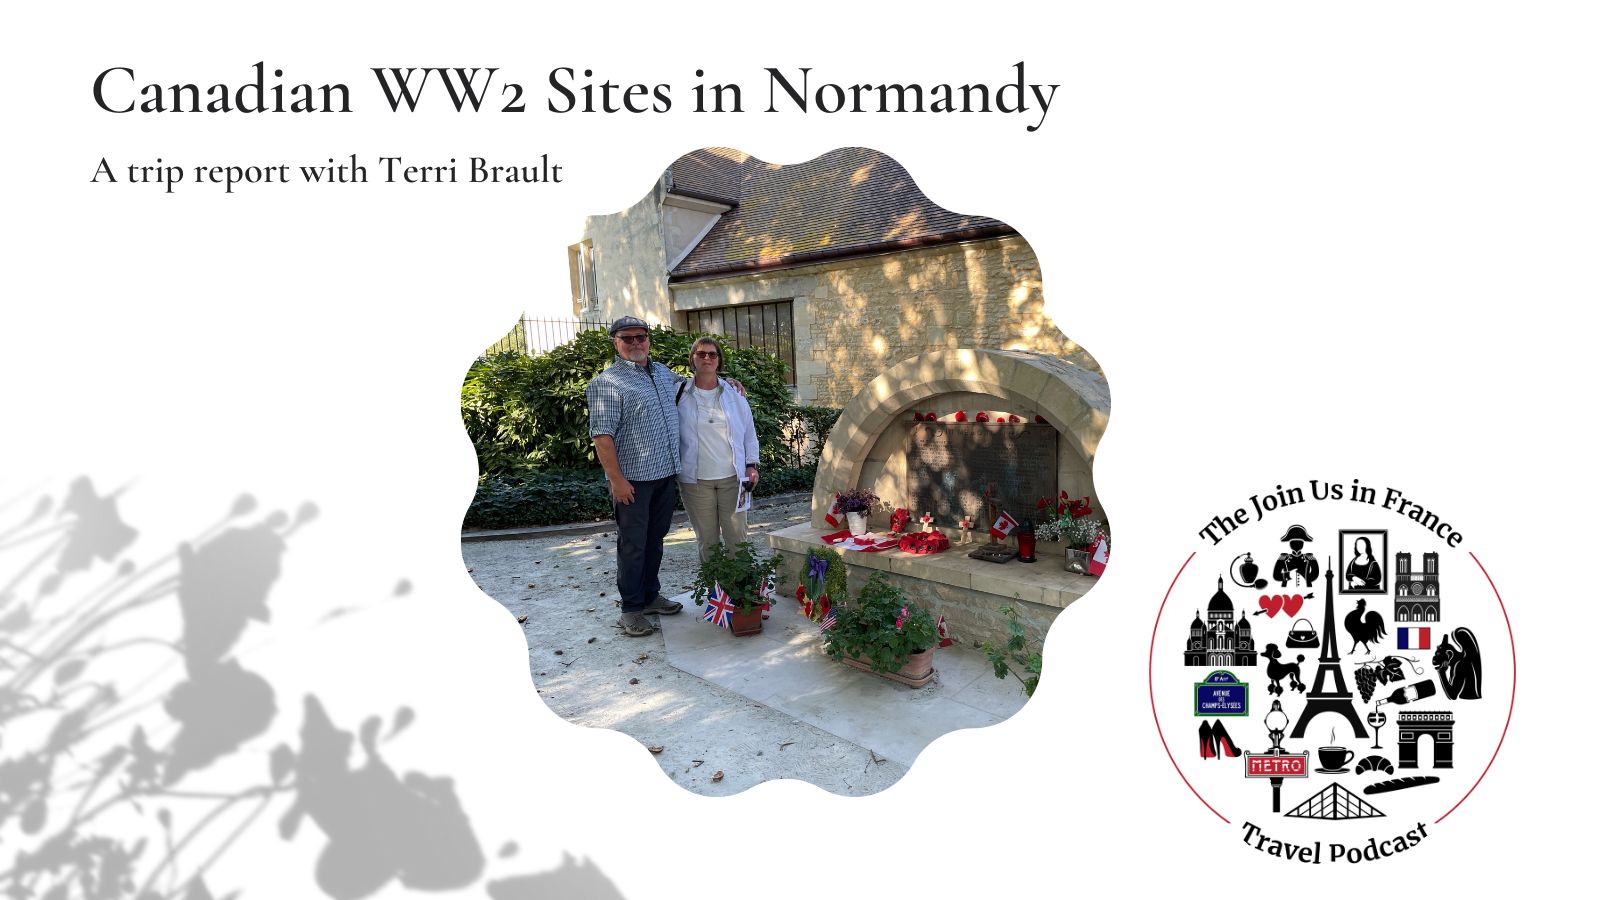 Terri and Paul by a Canadian WW2 Normandy Sites